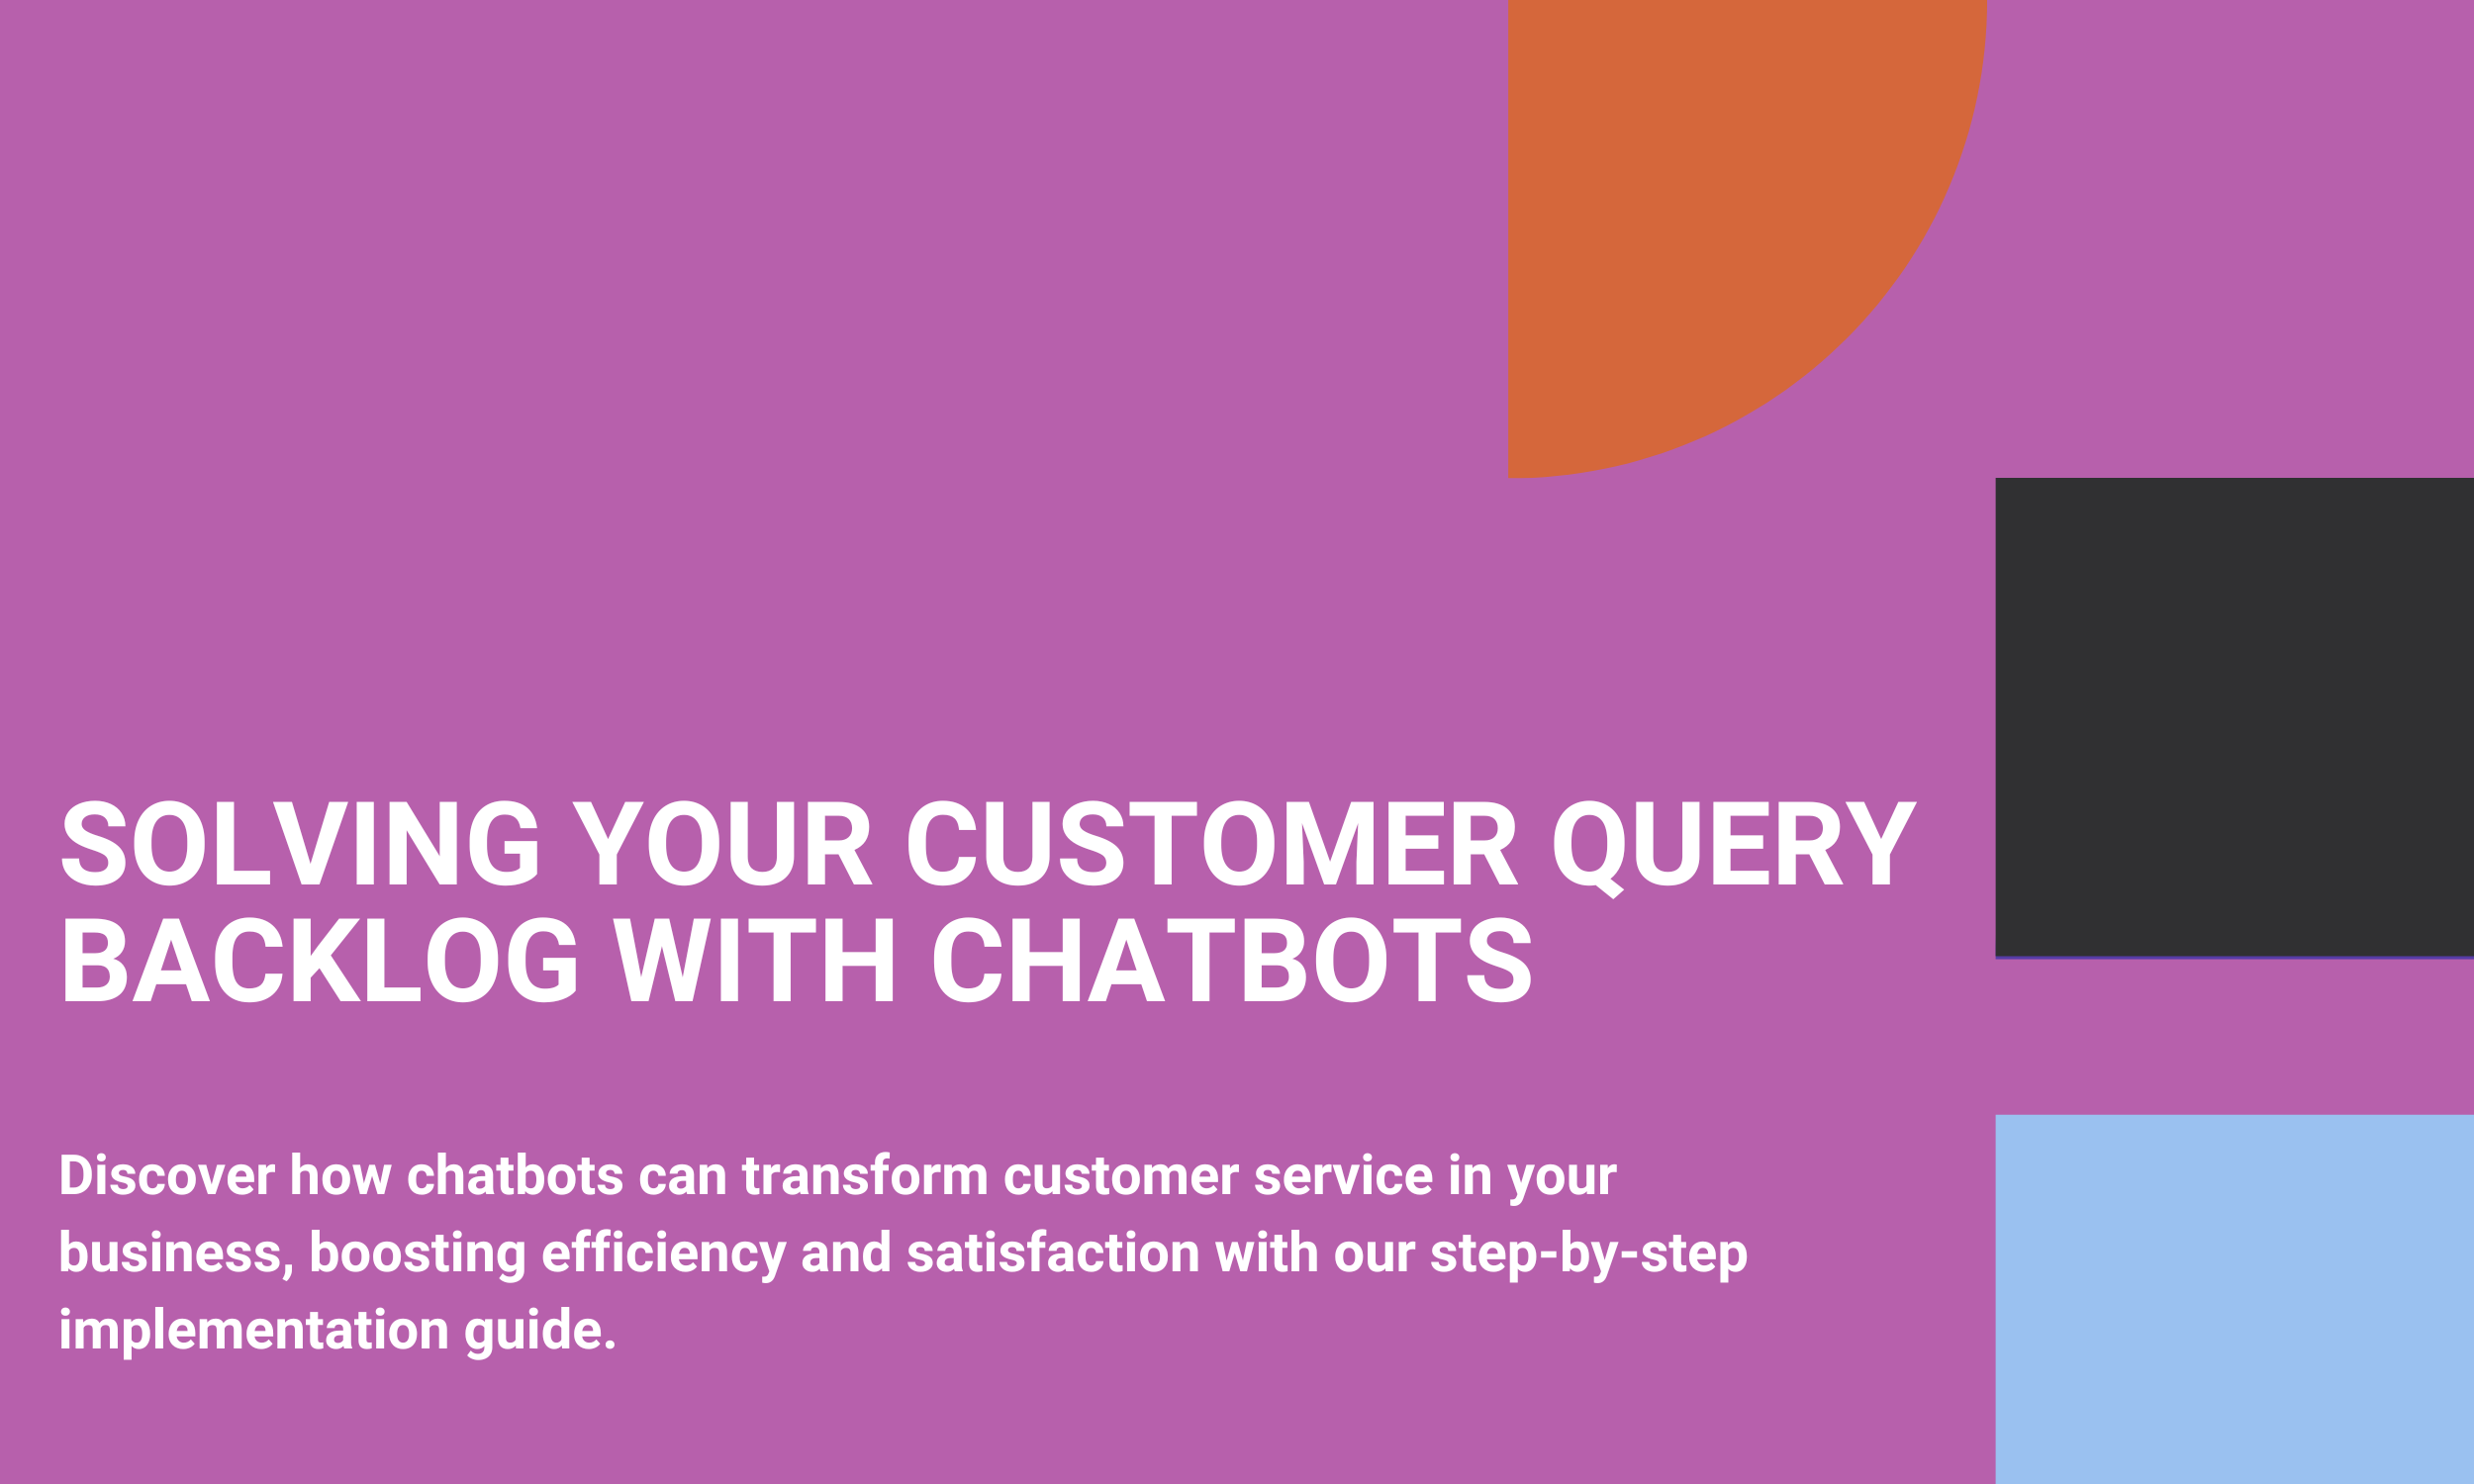 Solving Your Customer Query backlog with Chatbots